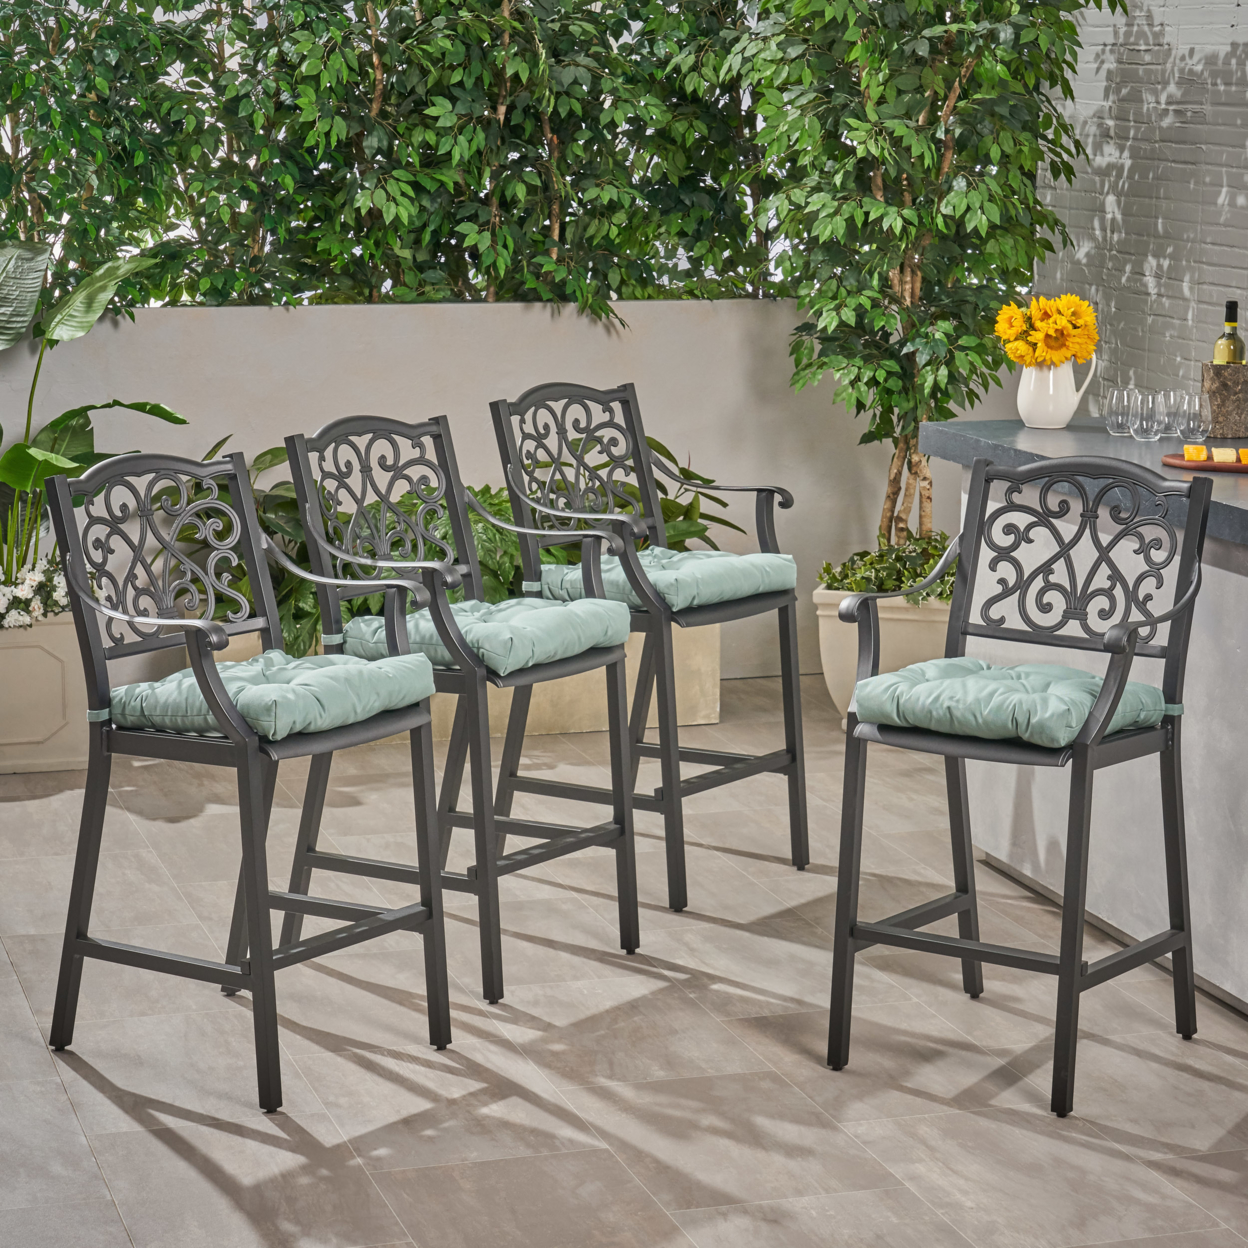 Gwendolyn Outdoor Barstool With Cushion (Set Of 4) Antique Matte Black And Charcoal - Antique Matte Black + Teal